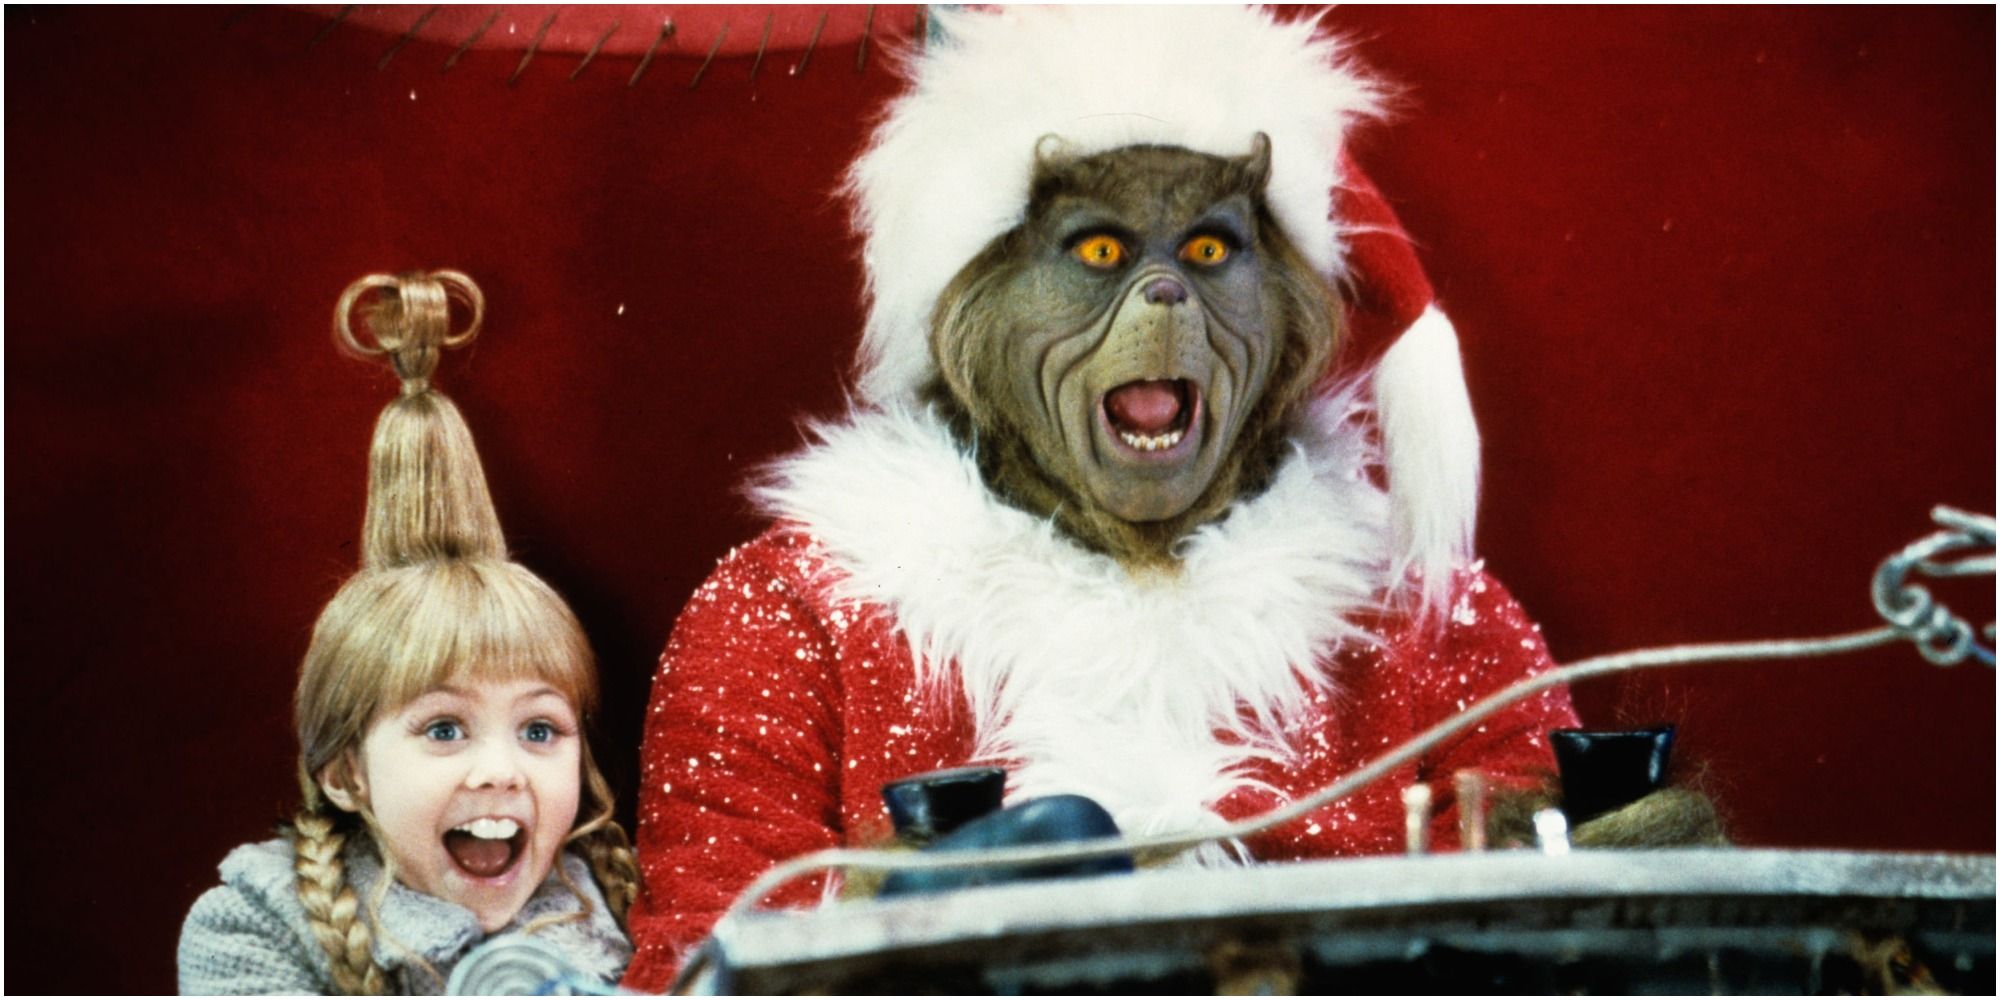 Grinch and Cindy Lou on a sleigh in How the Grinch Stole Christmas